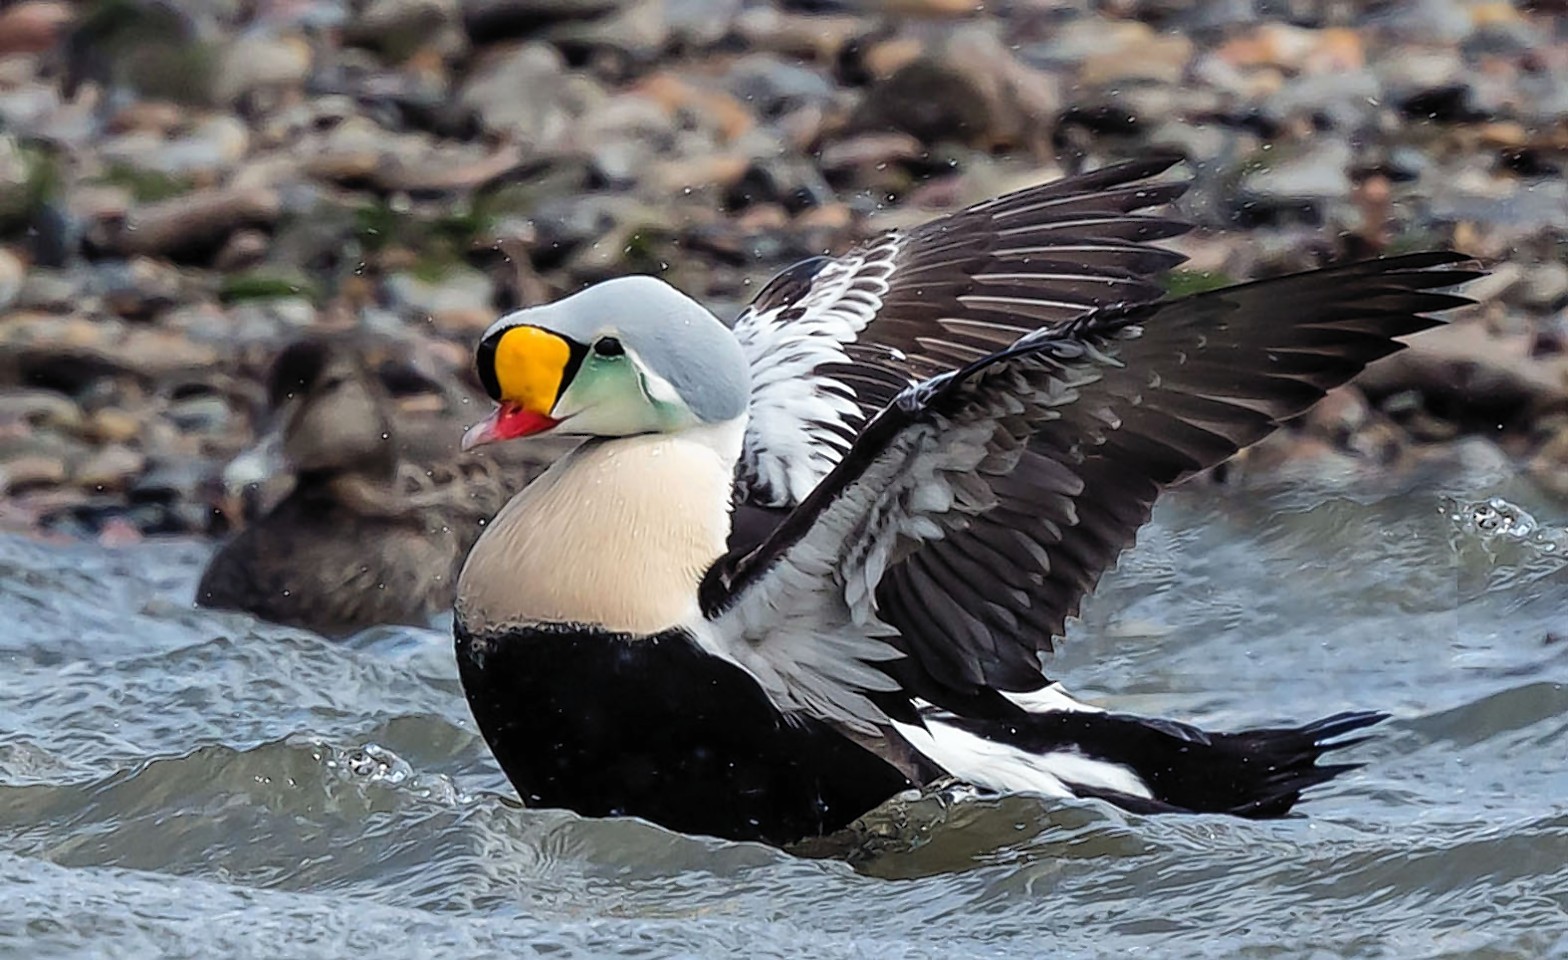 The King Eider was spotted off St Combs on Wednesday